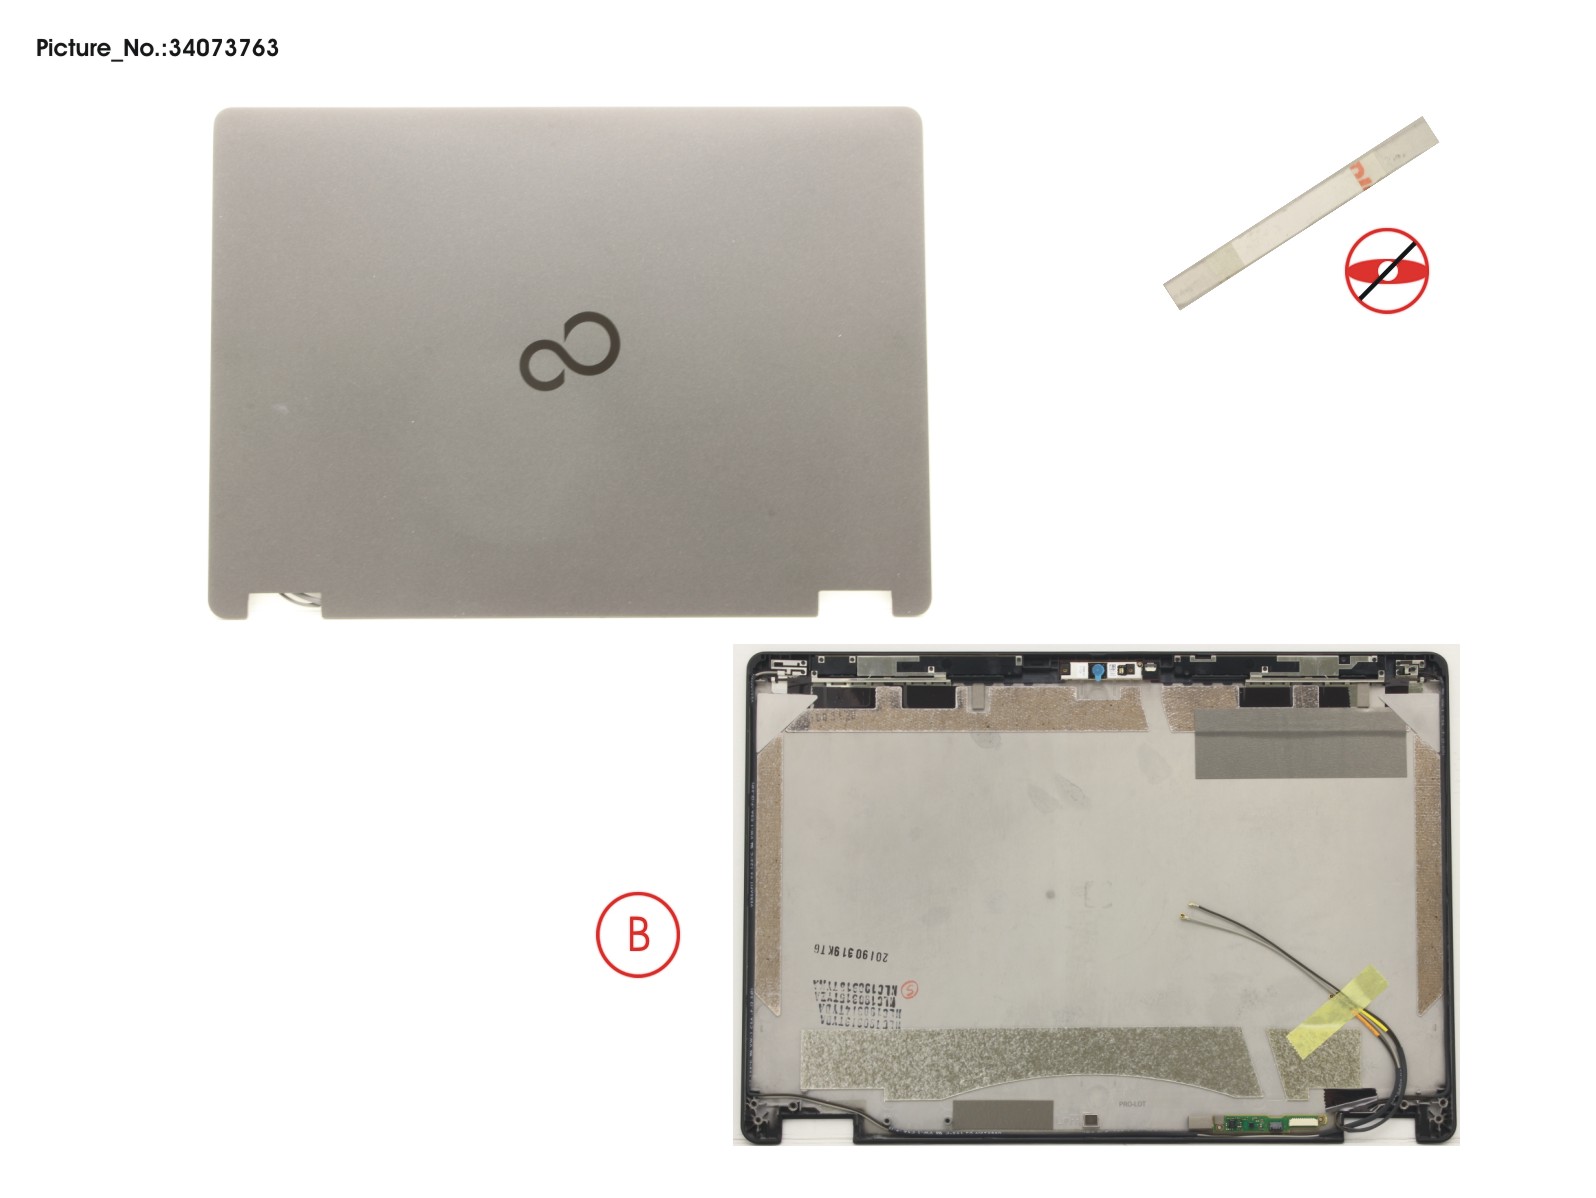 LCD BACK COVER ASSY (FOR HD,W/CAM,WWAN)